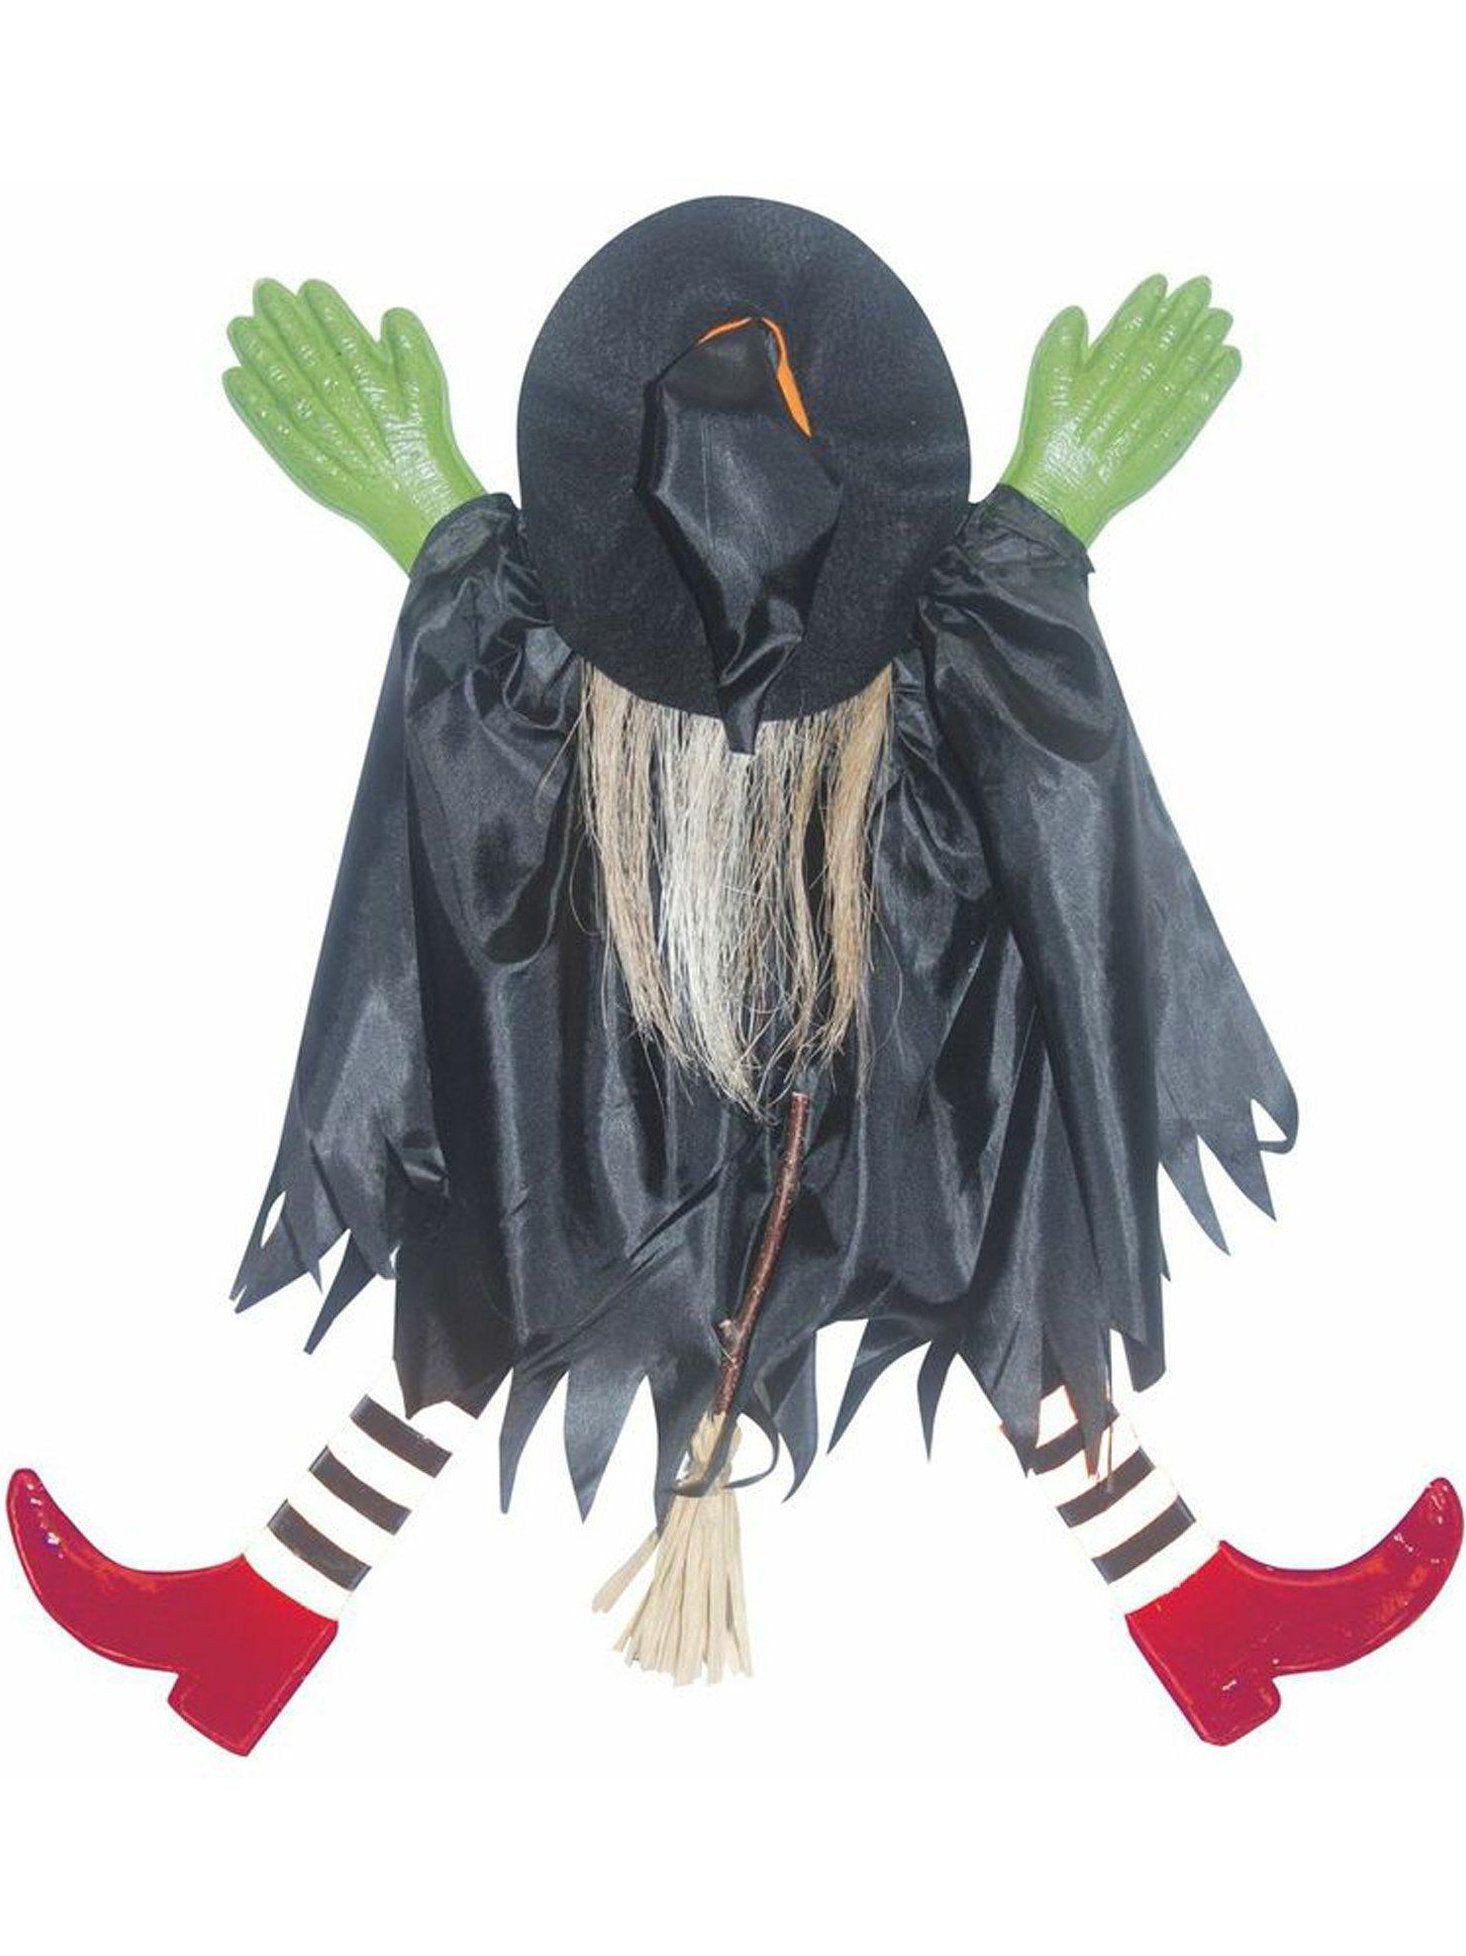 Wholesale Halloween Costume &amp; Party Supplies
 Tree Witch Prop Halloween Decorations for 2019